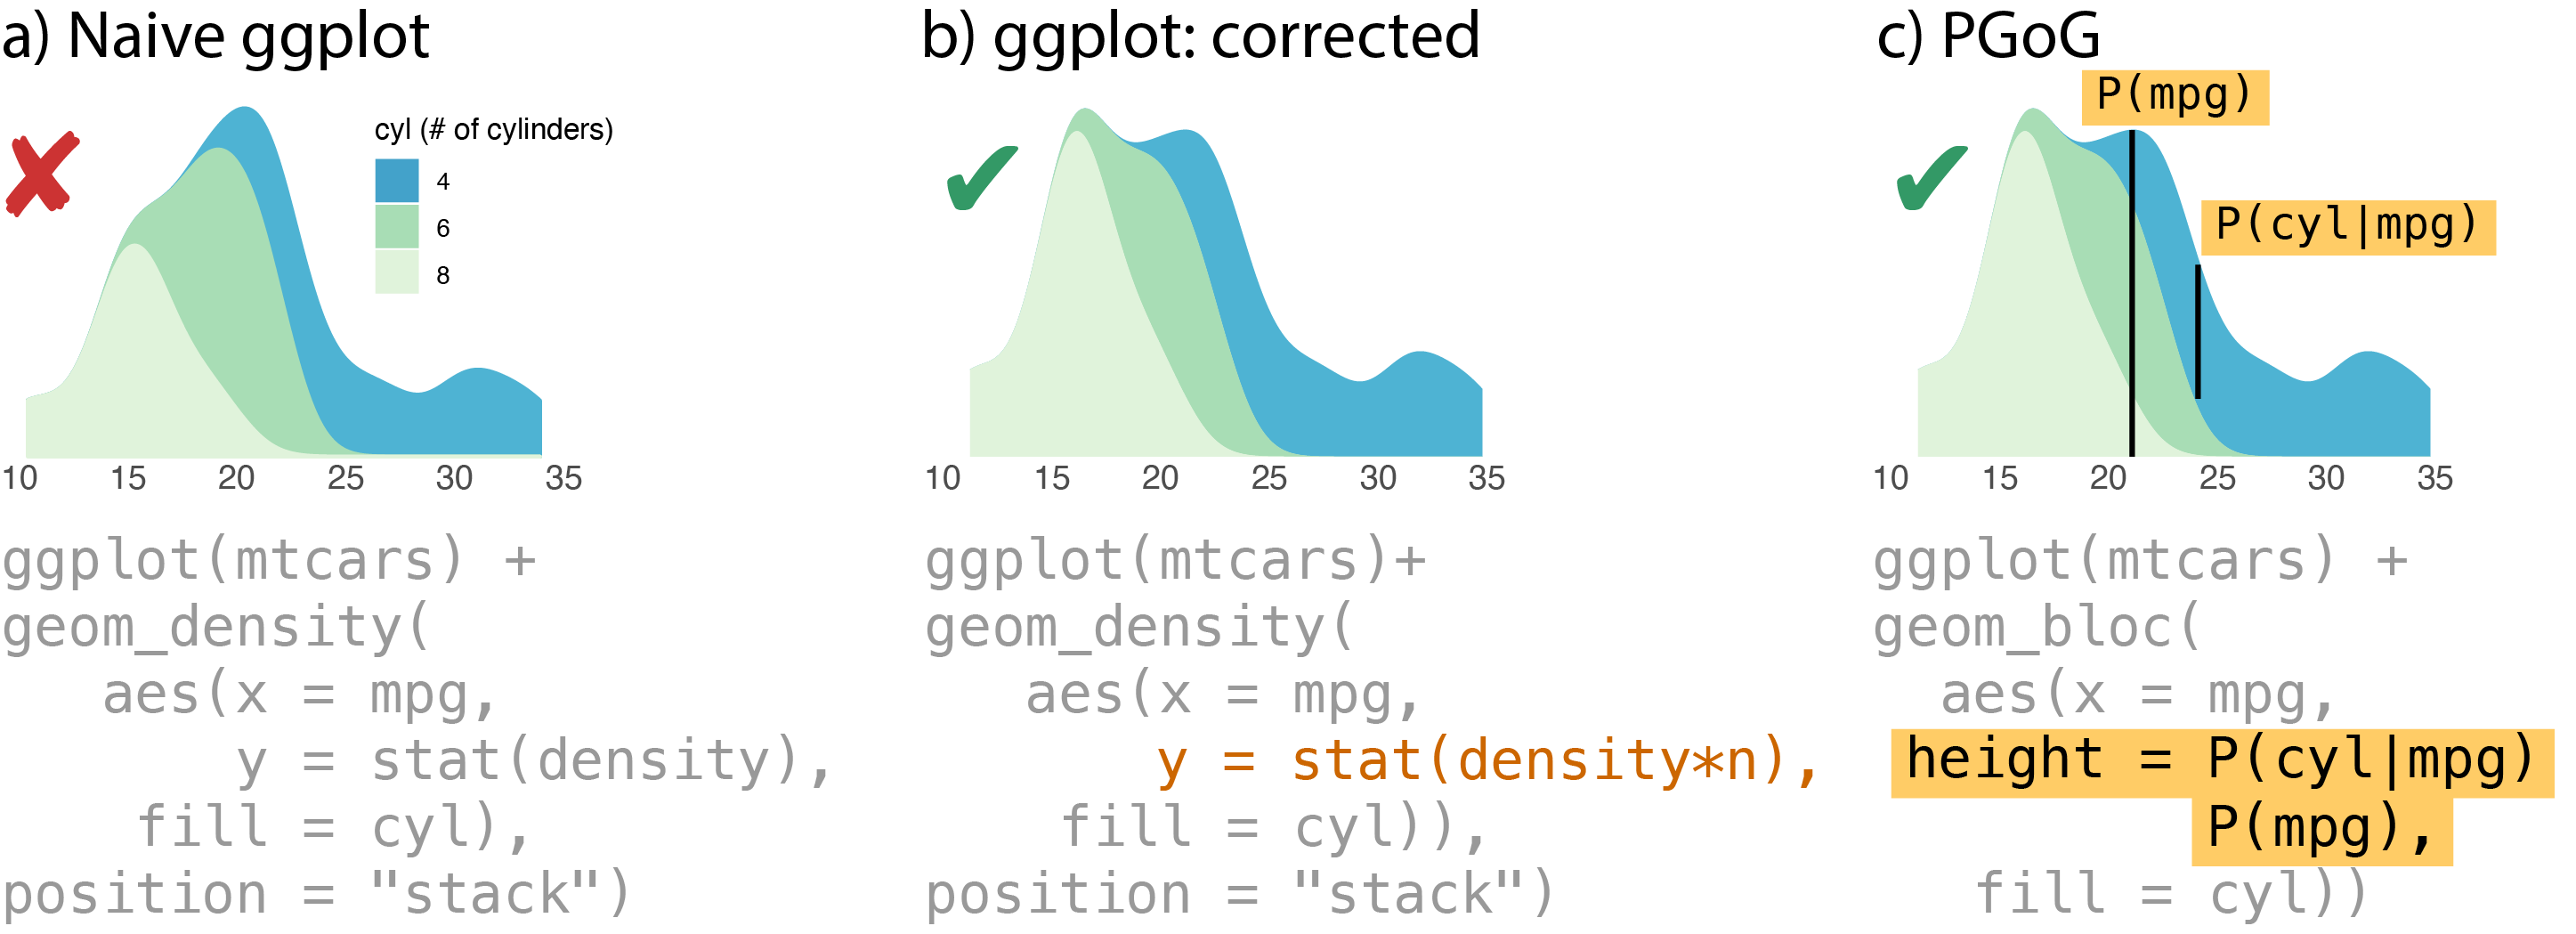 A motivating example for the Probabilistic Grammar of Graphics with the mtcars dataset. a) In base ggplot2, naively introducing the variable cyl creates partition of the density plot disproportional to the true cyl counts. b) In base ggplot2, normalizing the colored regions by hacking internal variables (density * n) creates a correct stacked density plot. c) PGoG generates the correct density plot using syntax closer to users’ statistical language, in terms of probability expressions.